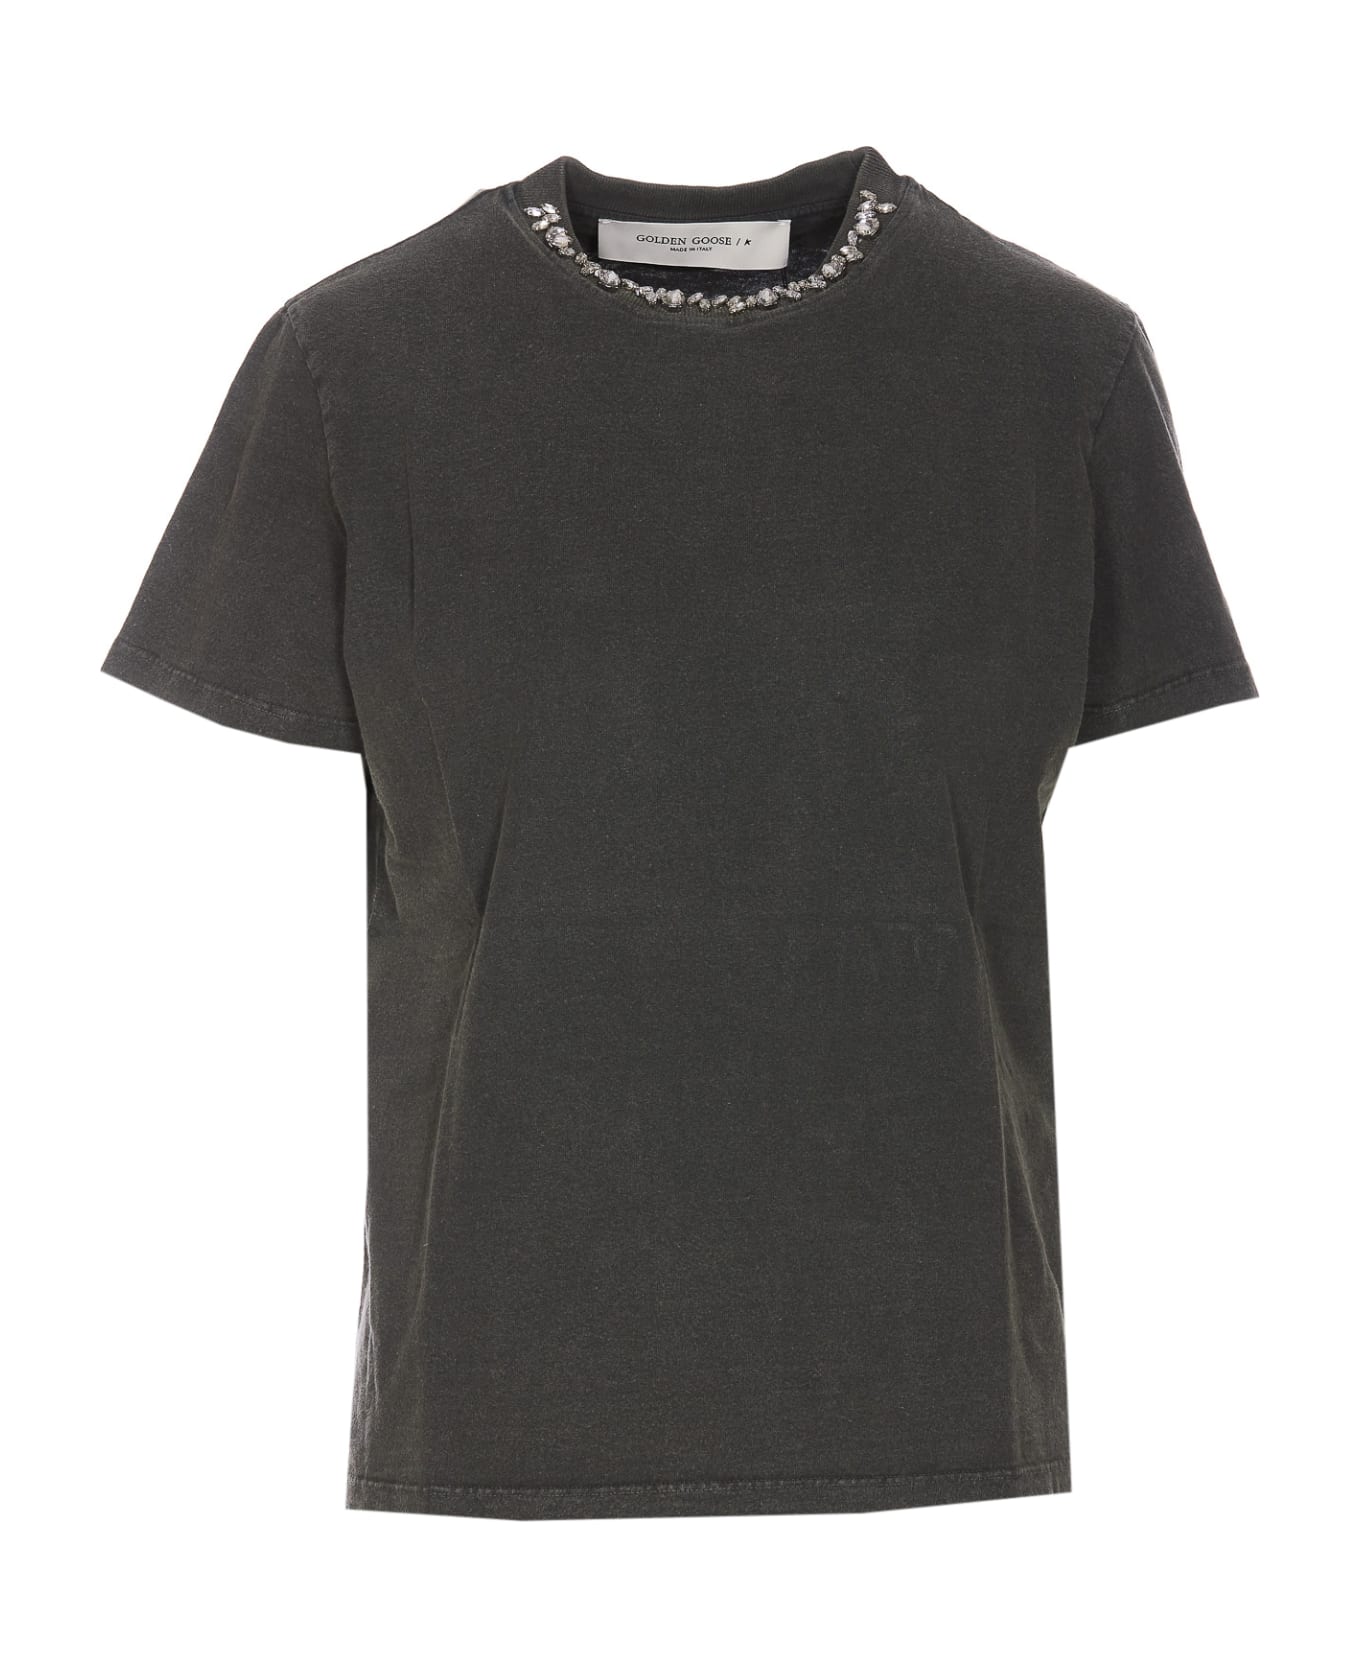 Golden Goose T-shirtwith Crystals - Grey